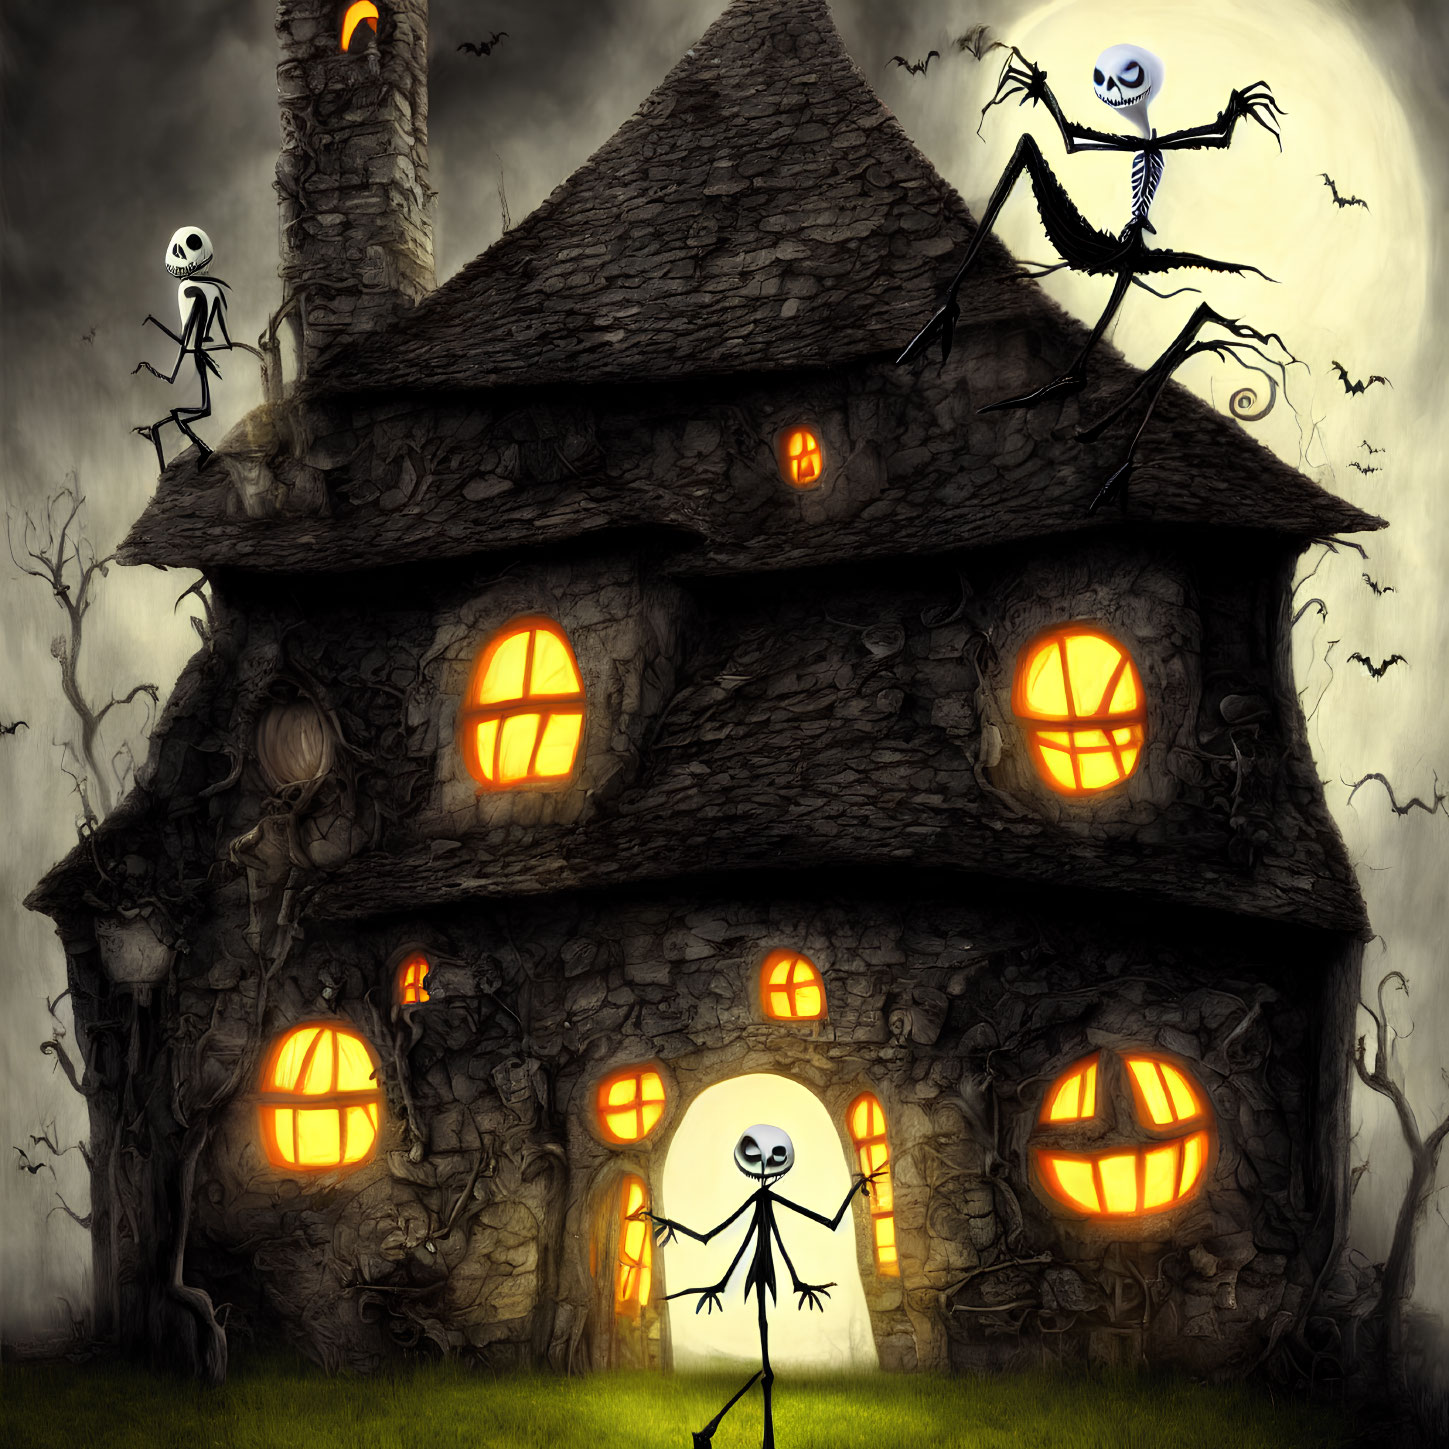 Spooky Halloween illustration: skeletal figures, witch's cottage, glowing windows